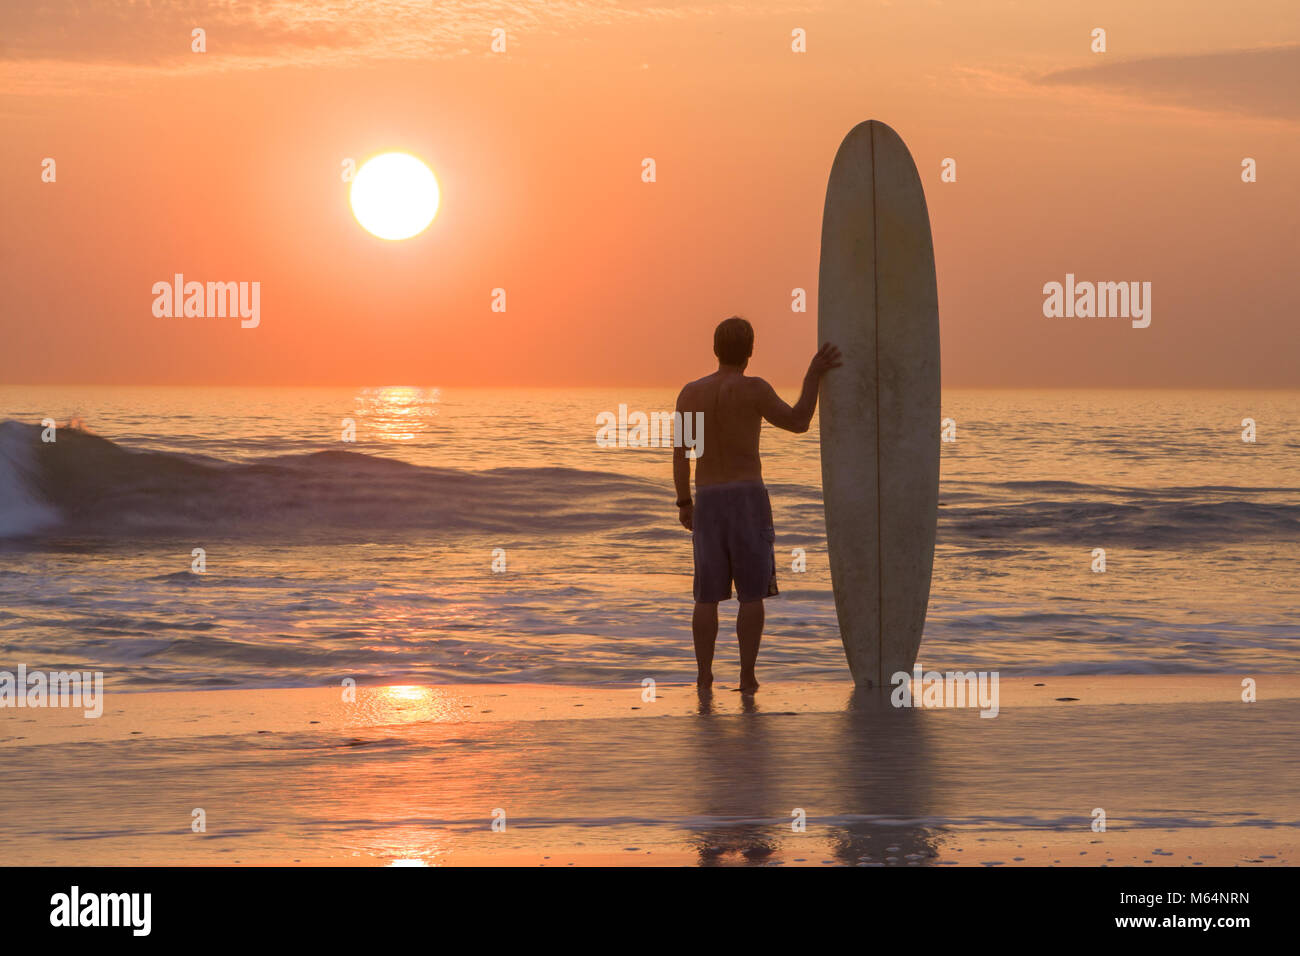 surfer with longboard standing on beach at sunset watching waves Stock Photo